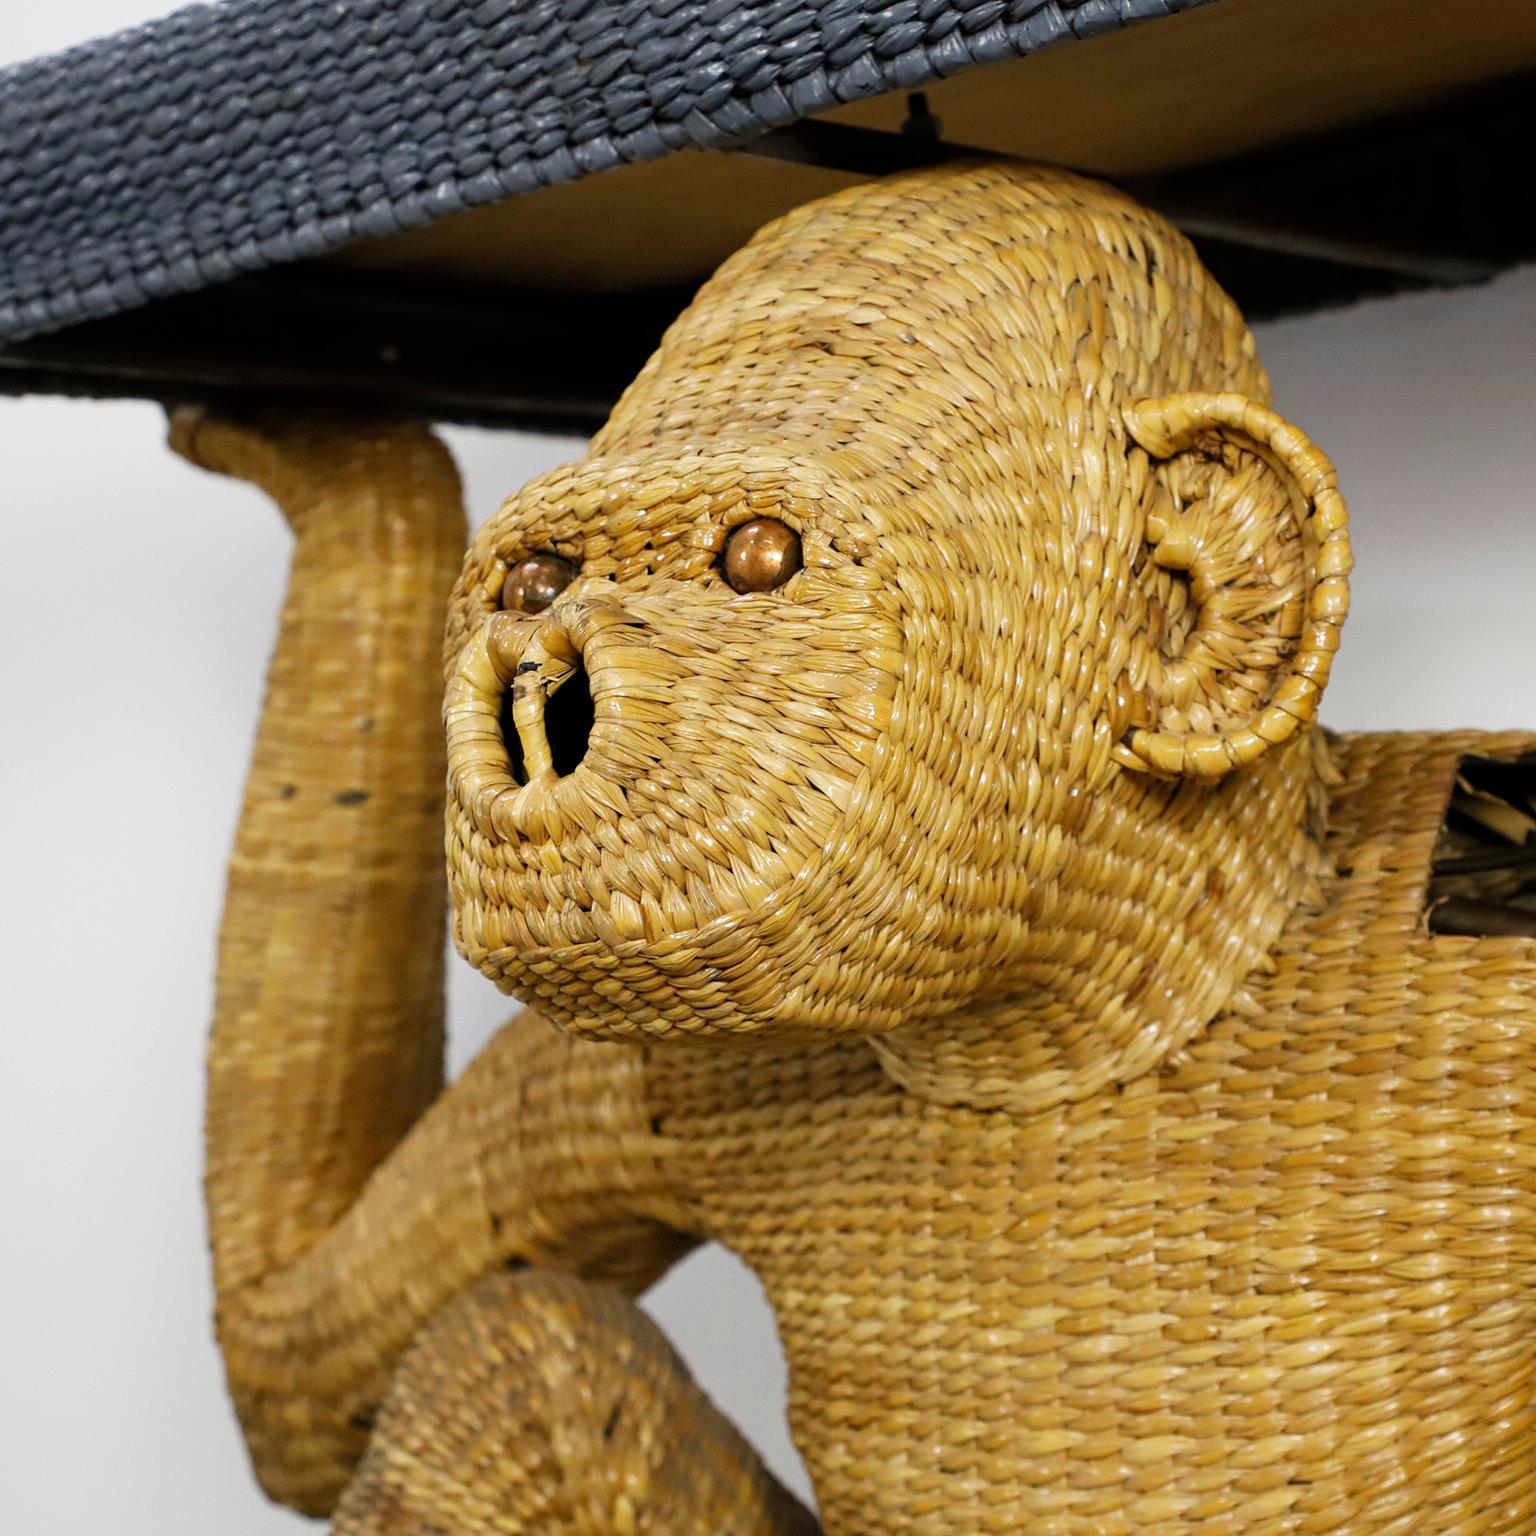 Circa 1970, we offer this Antique Original Mario Lopez Torres Monkey Console, made in natural woven and iron structure, Hecho en Mexico. The console presents some missing typical of the age.